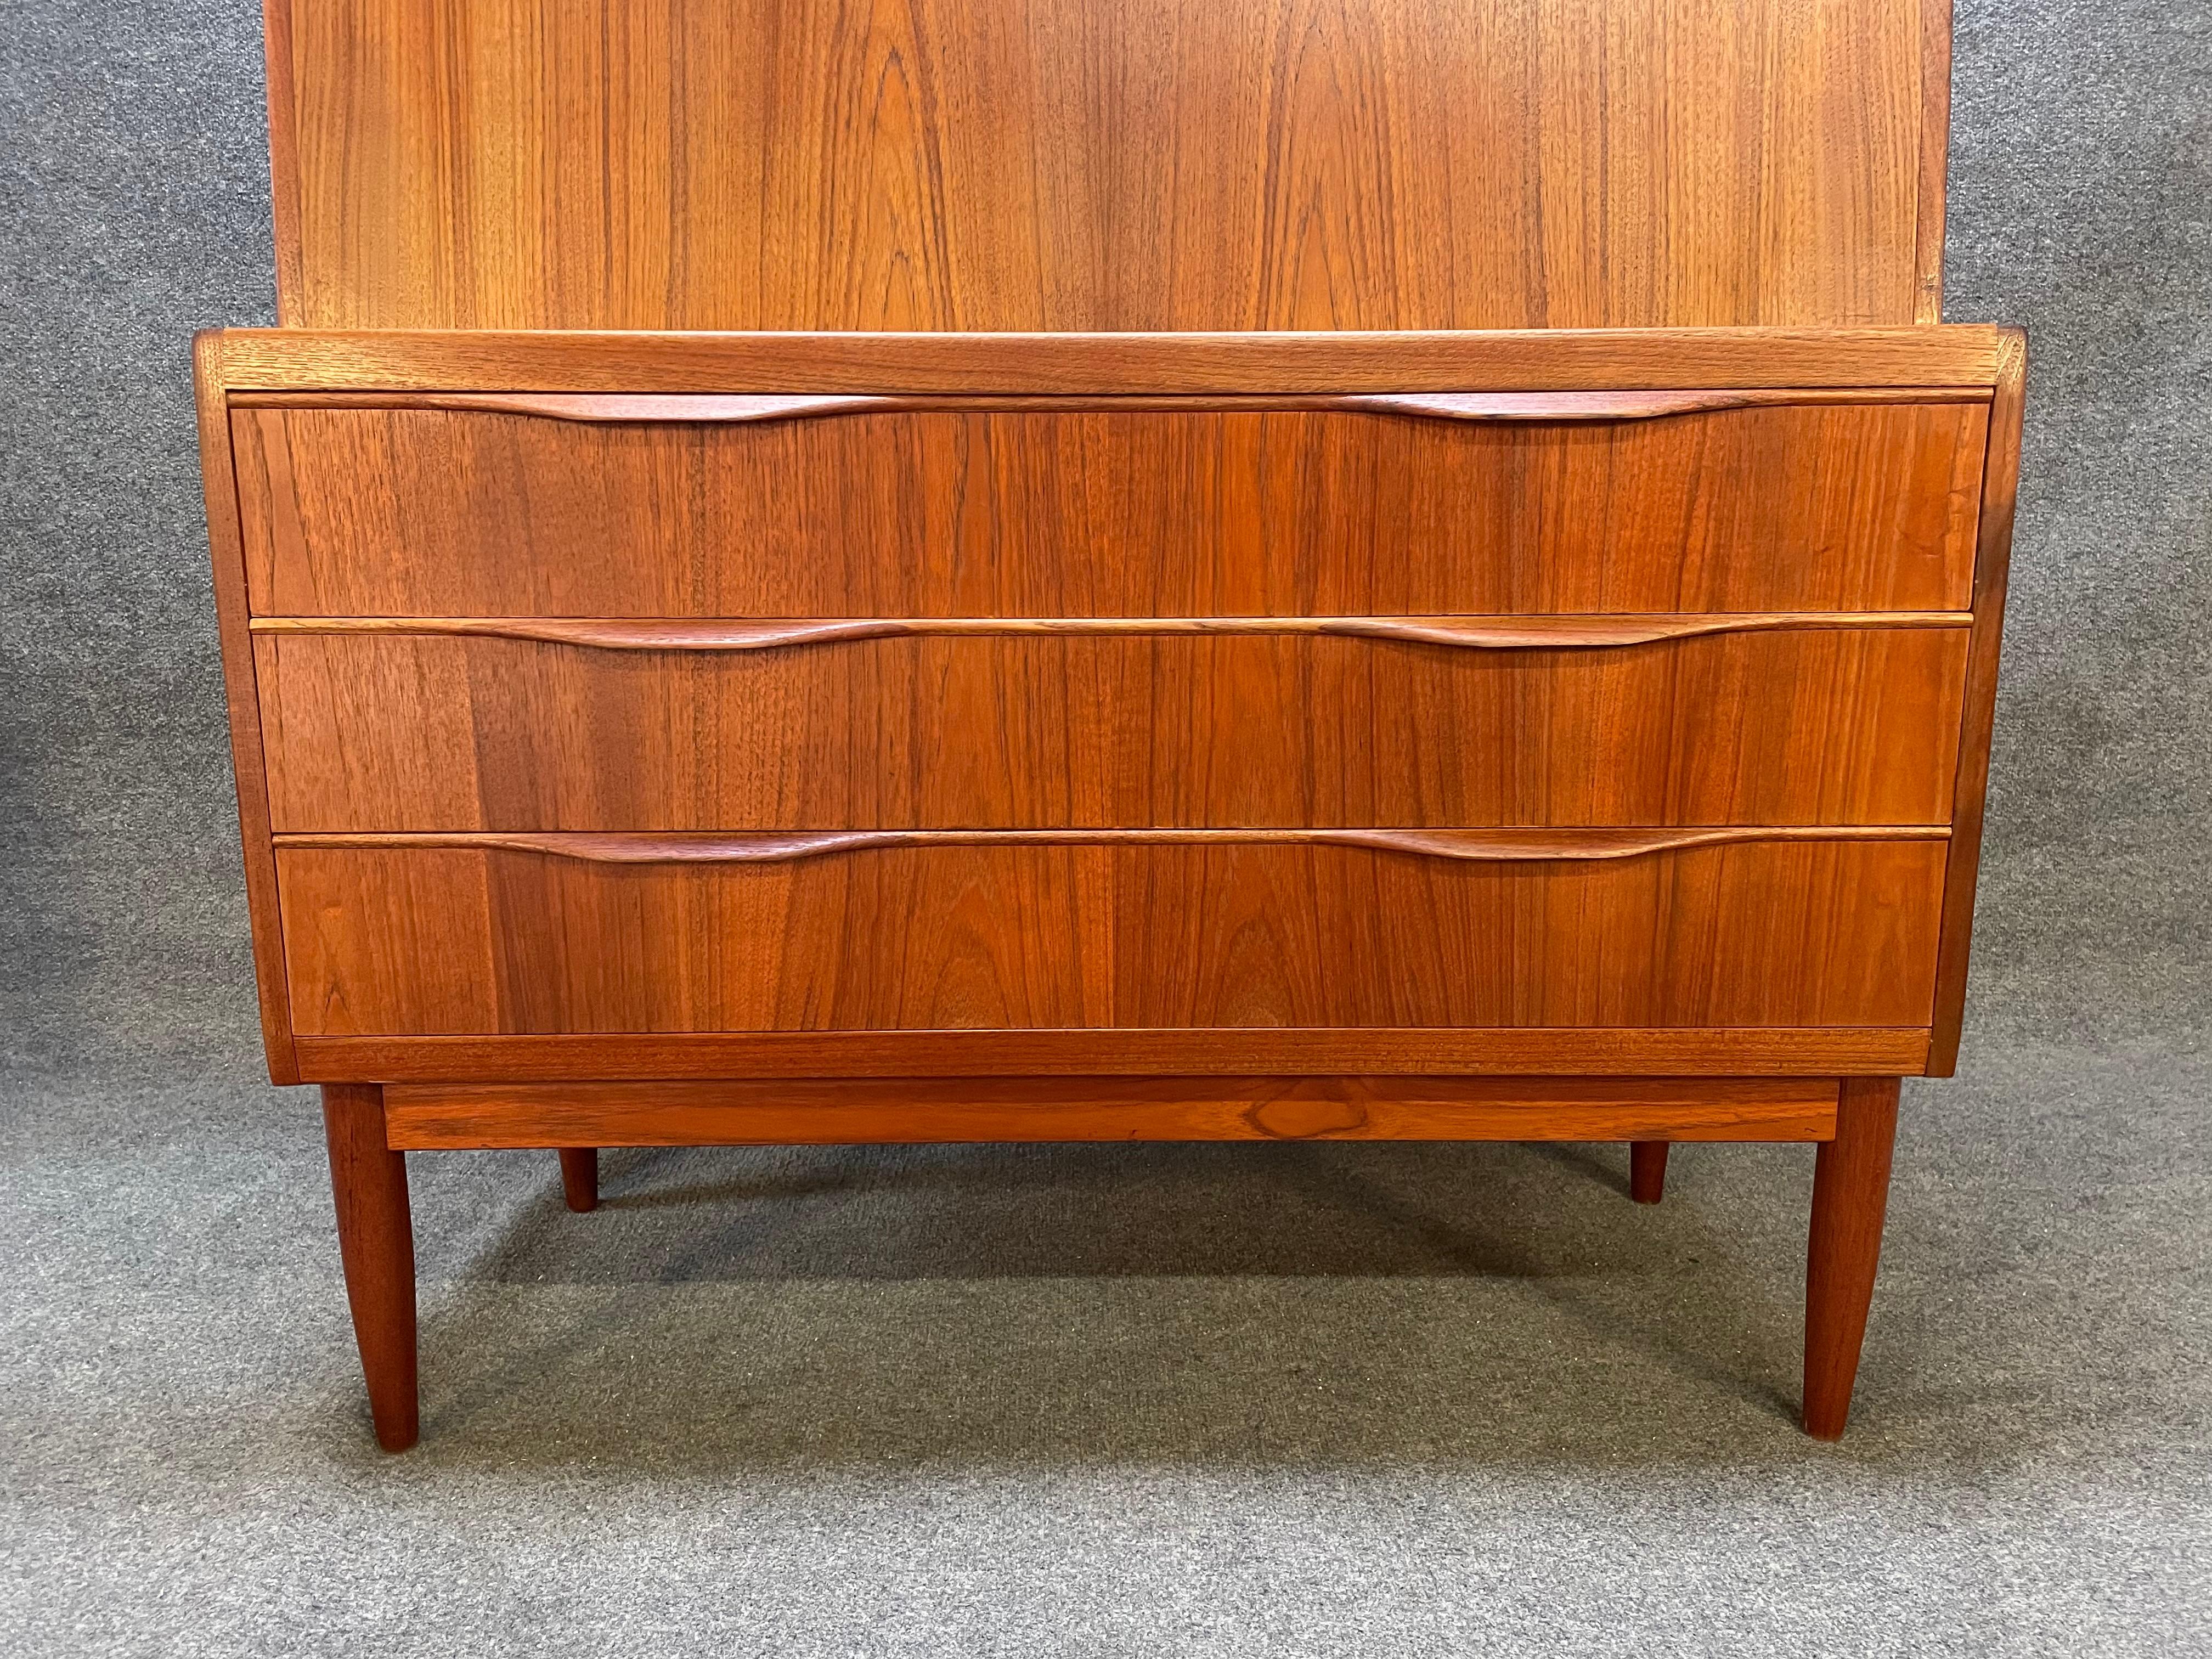 Here is a beautiful Scandinavian modern secretary desk in teak wood designed by Erlingb Torvitz in Denmark in the 1960's. This exquisite piece, recently imported from Europe to California before its refinishing, features a vibrant wood grain, a drop